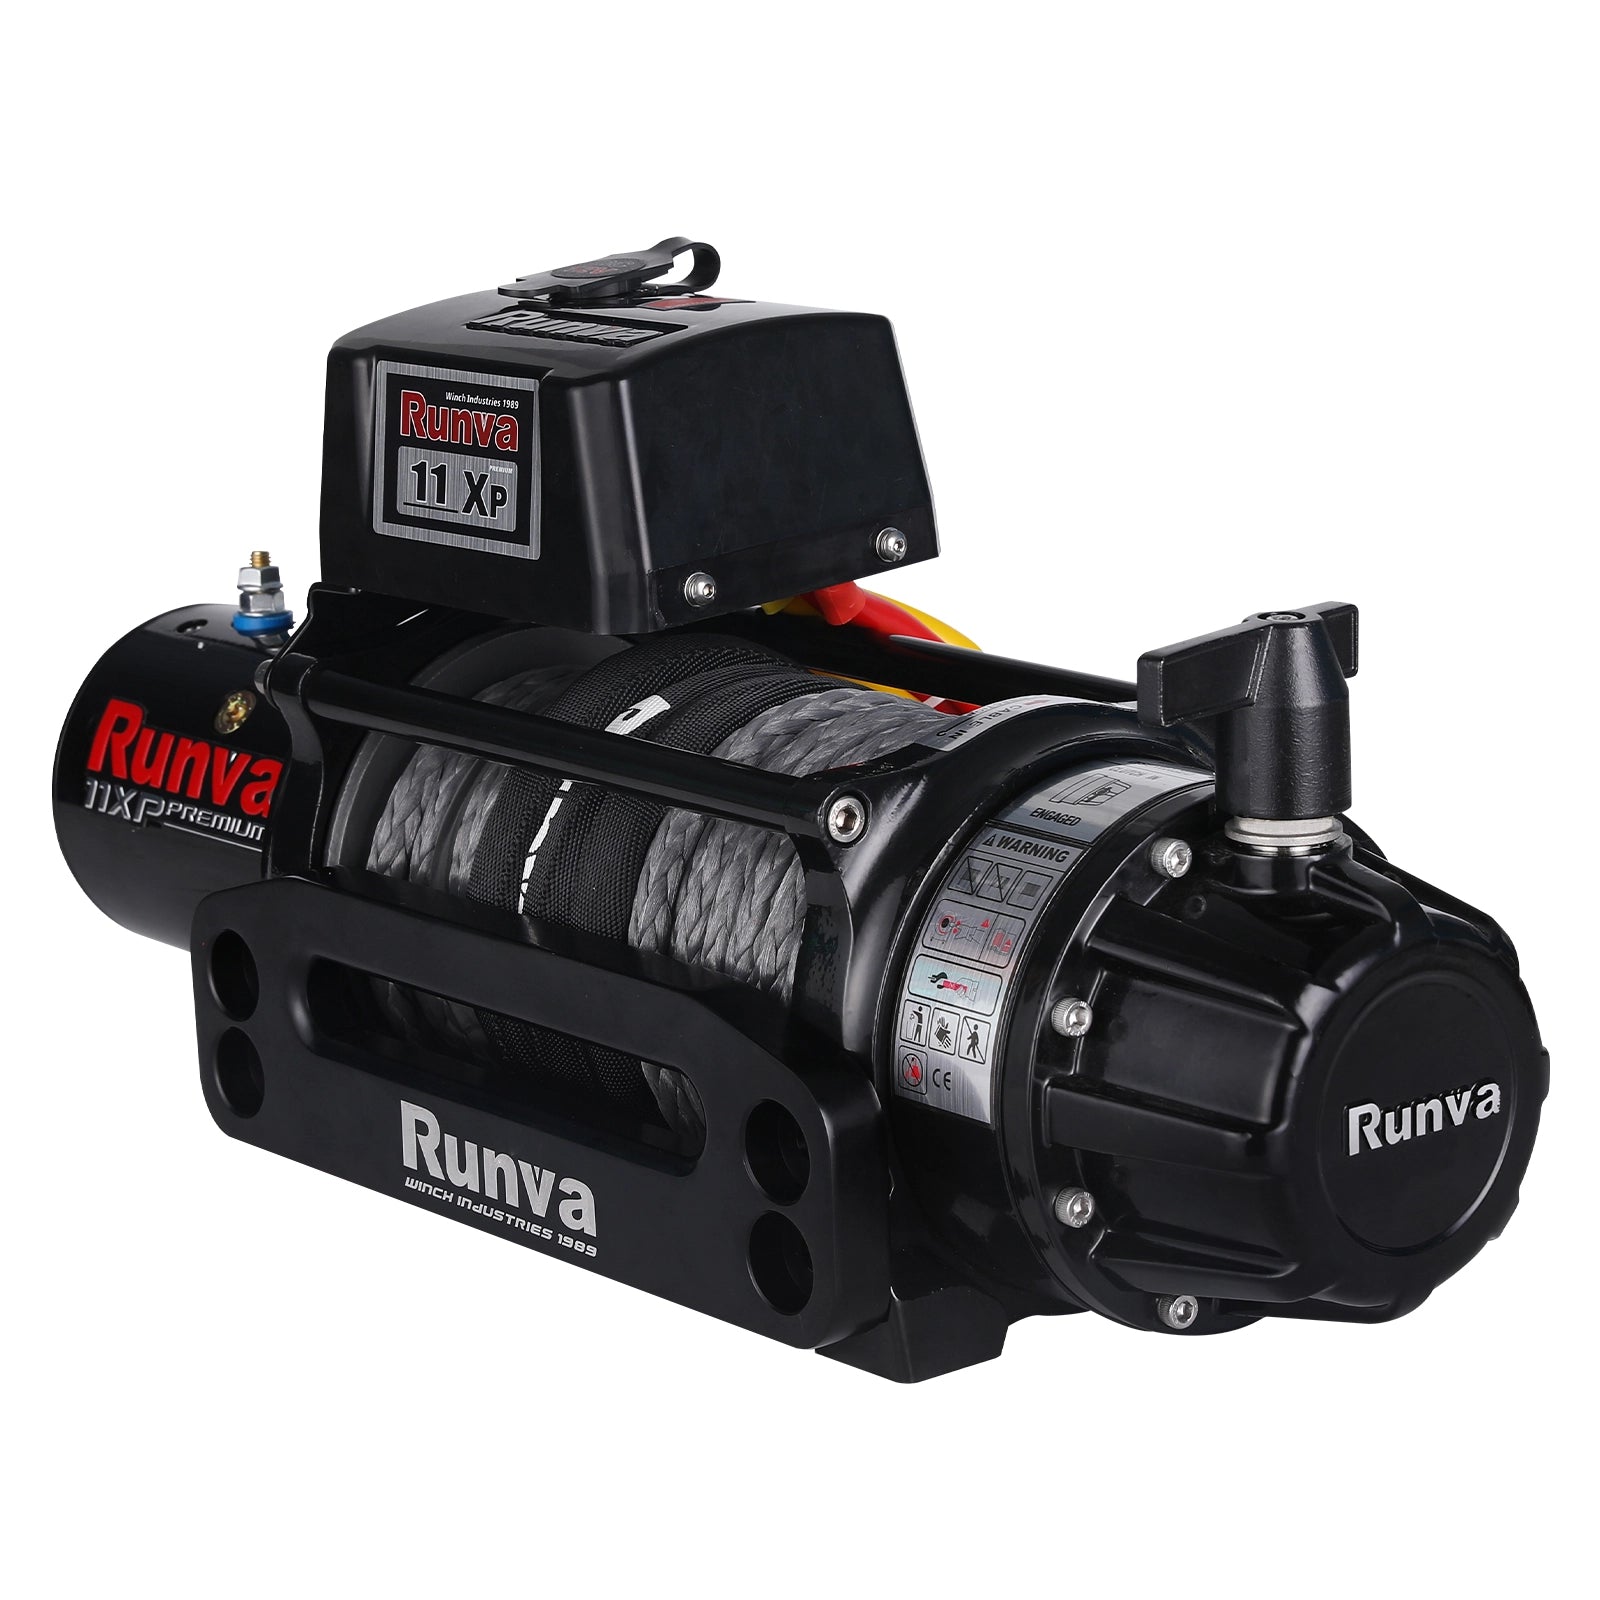 RUNVA 11XP PREMIUM 12V WITH SYNTHETIC ROPE